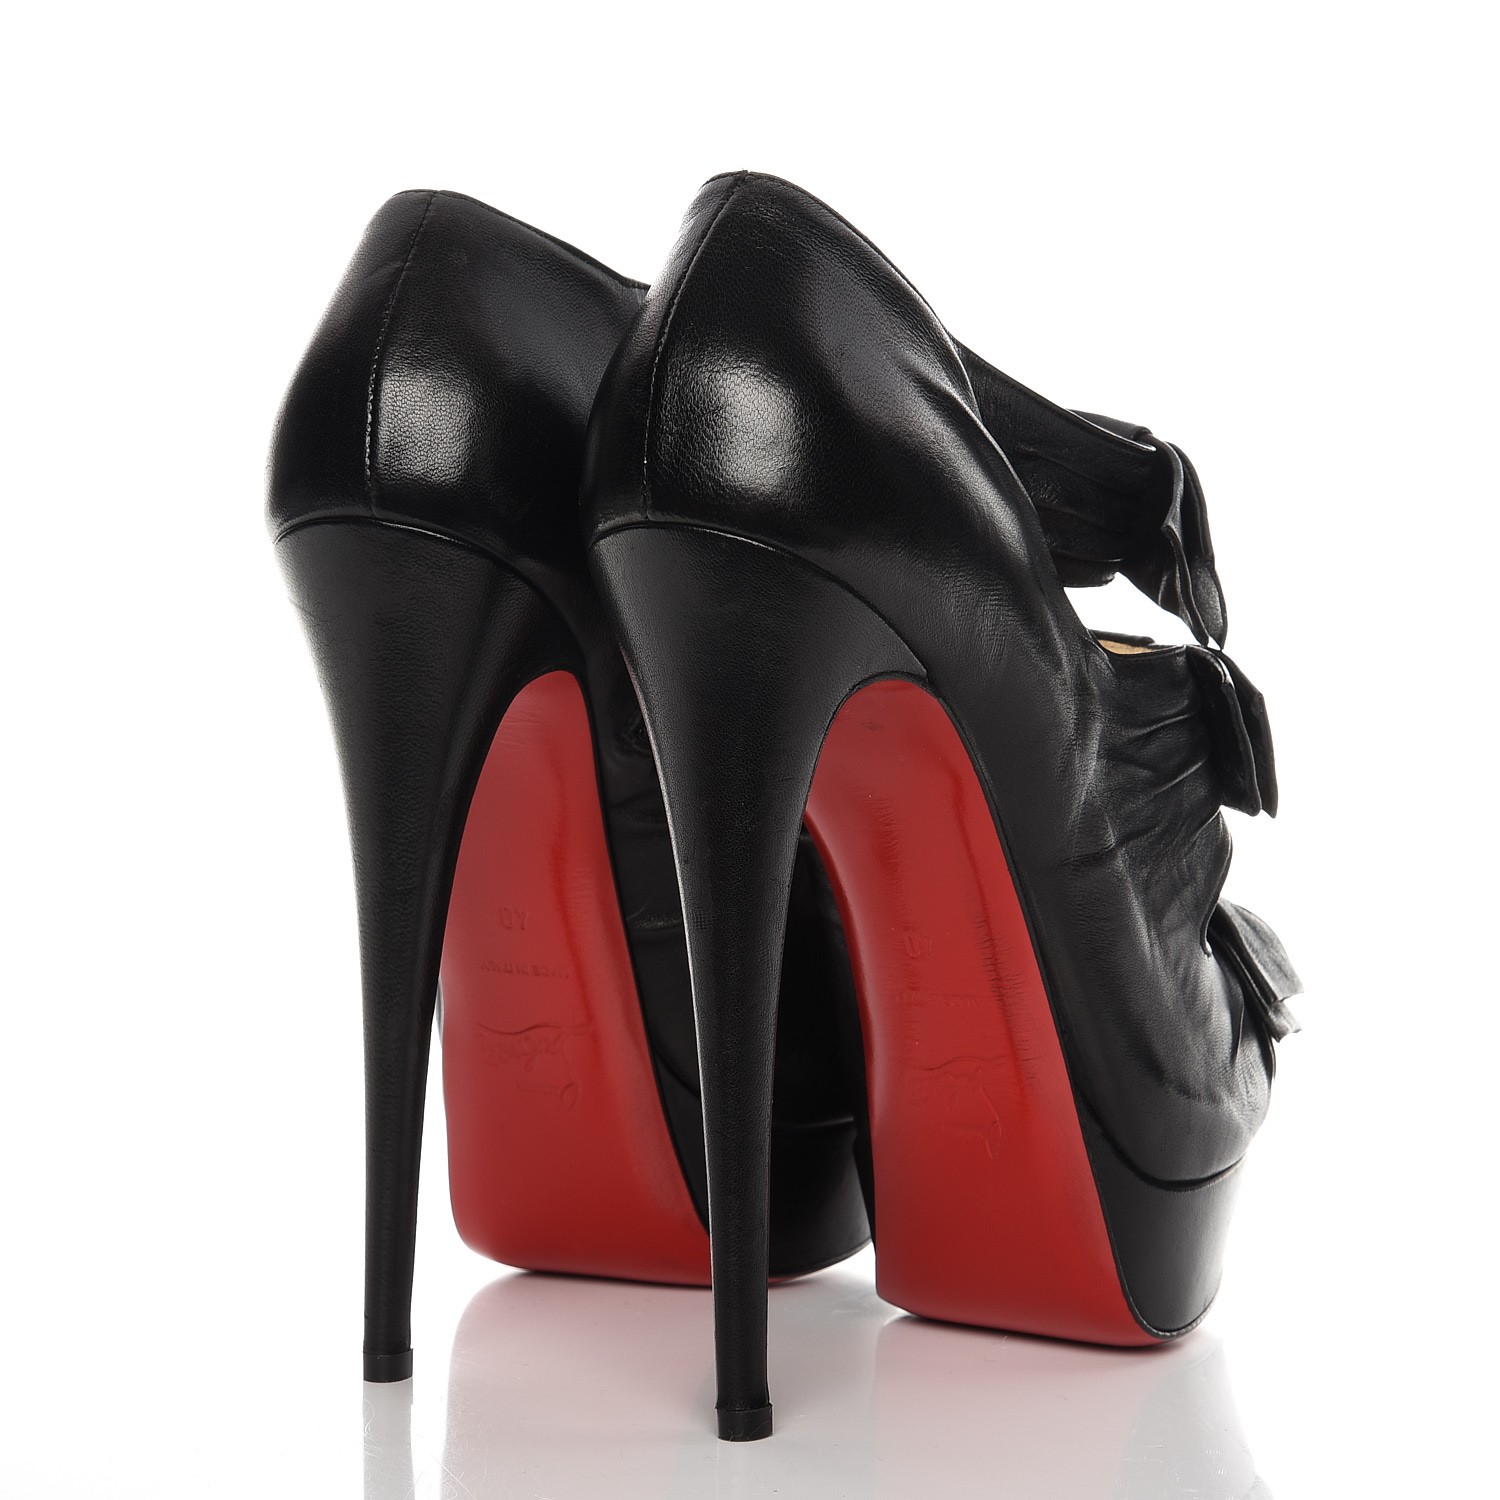 CHRISTIAN LOUBOUTIN Nappa Madame Butterfly 150 Booties 40 Black 221068